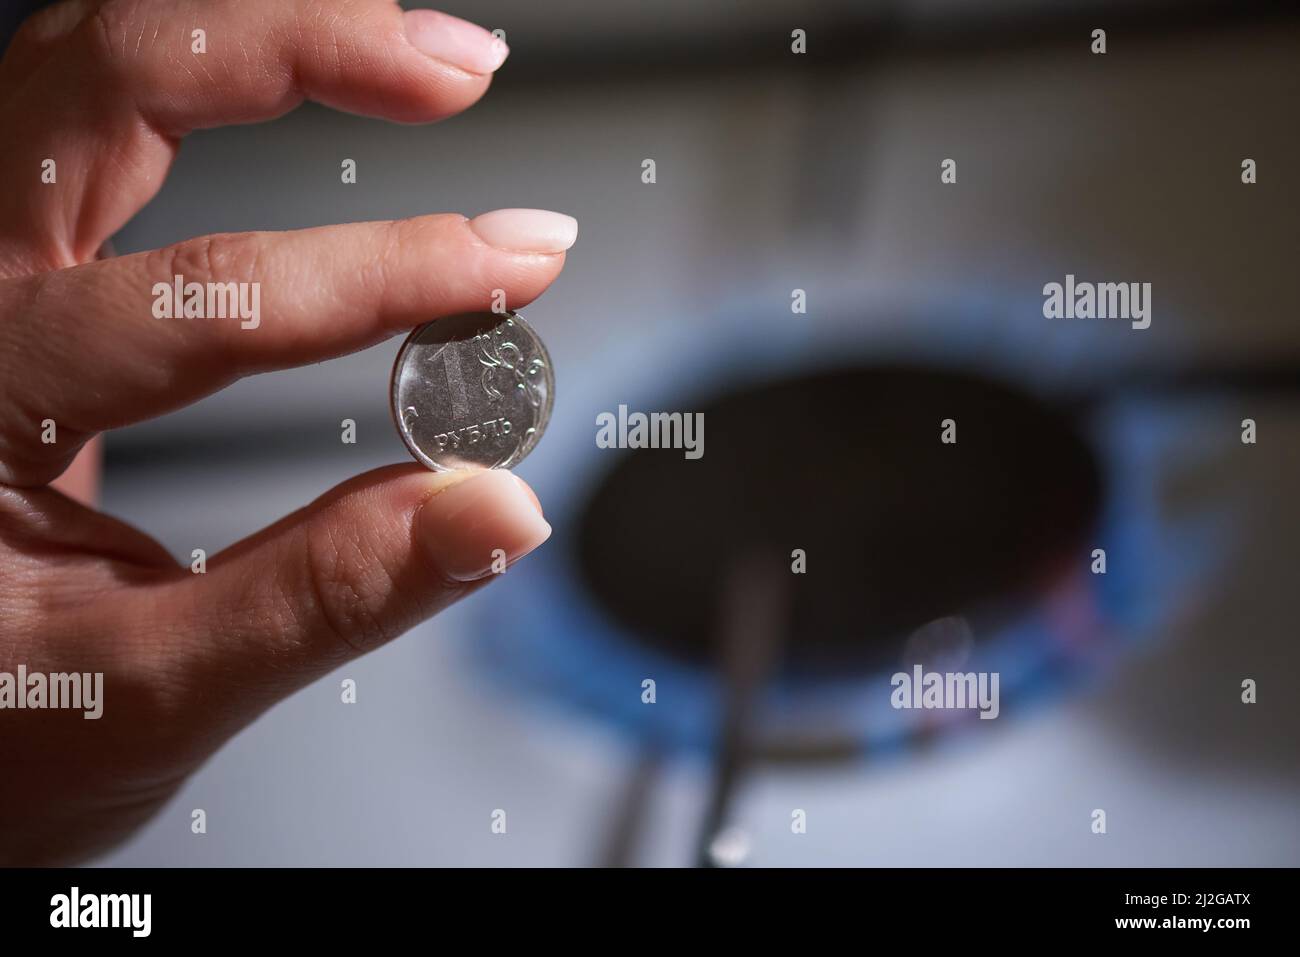 Russian money ruble on the background of a gas stove, the concept of buying gas for rubles Stock Photo